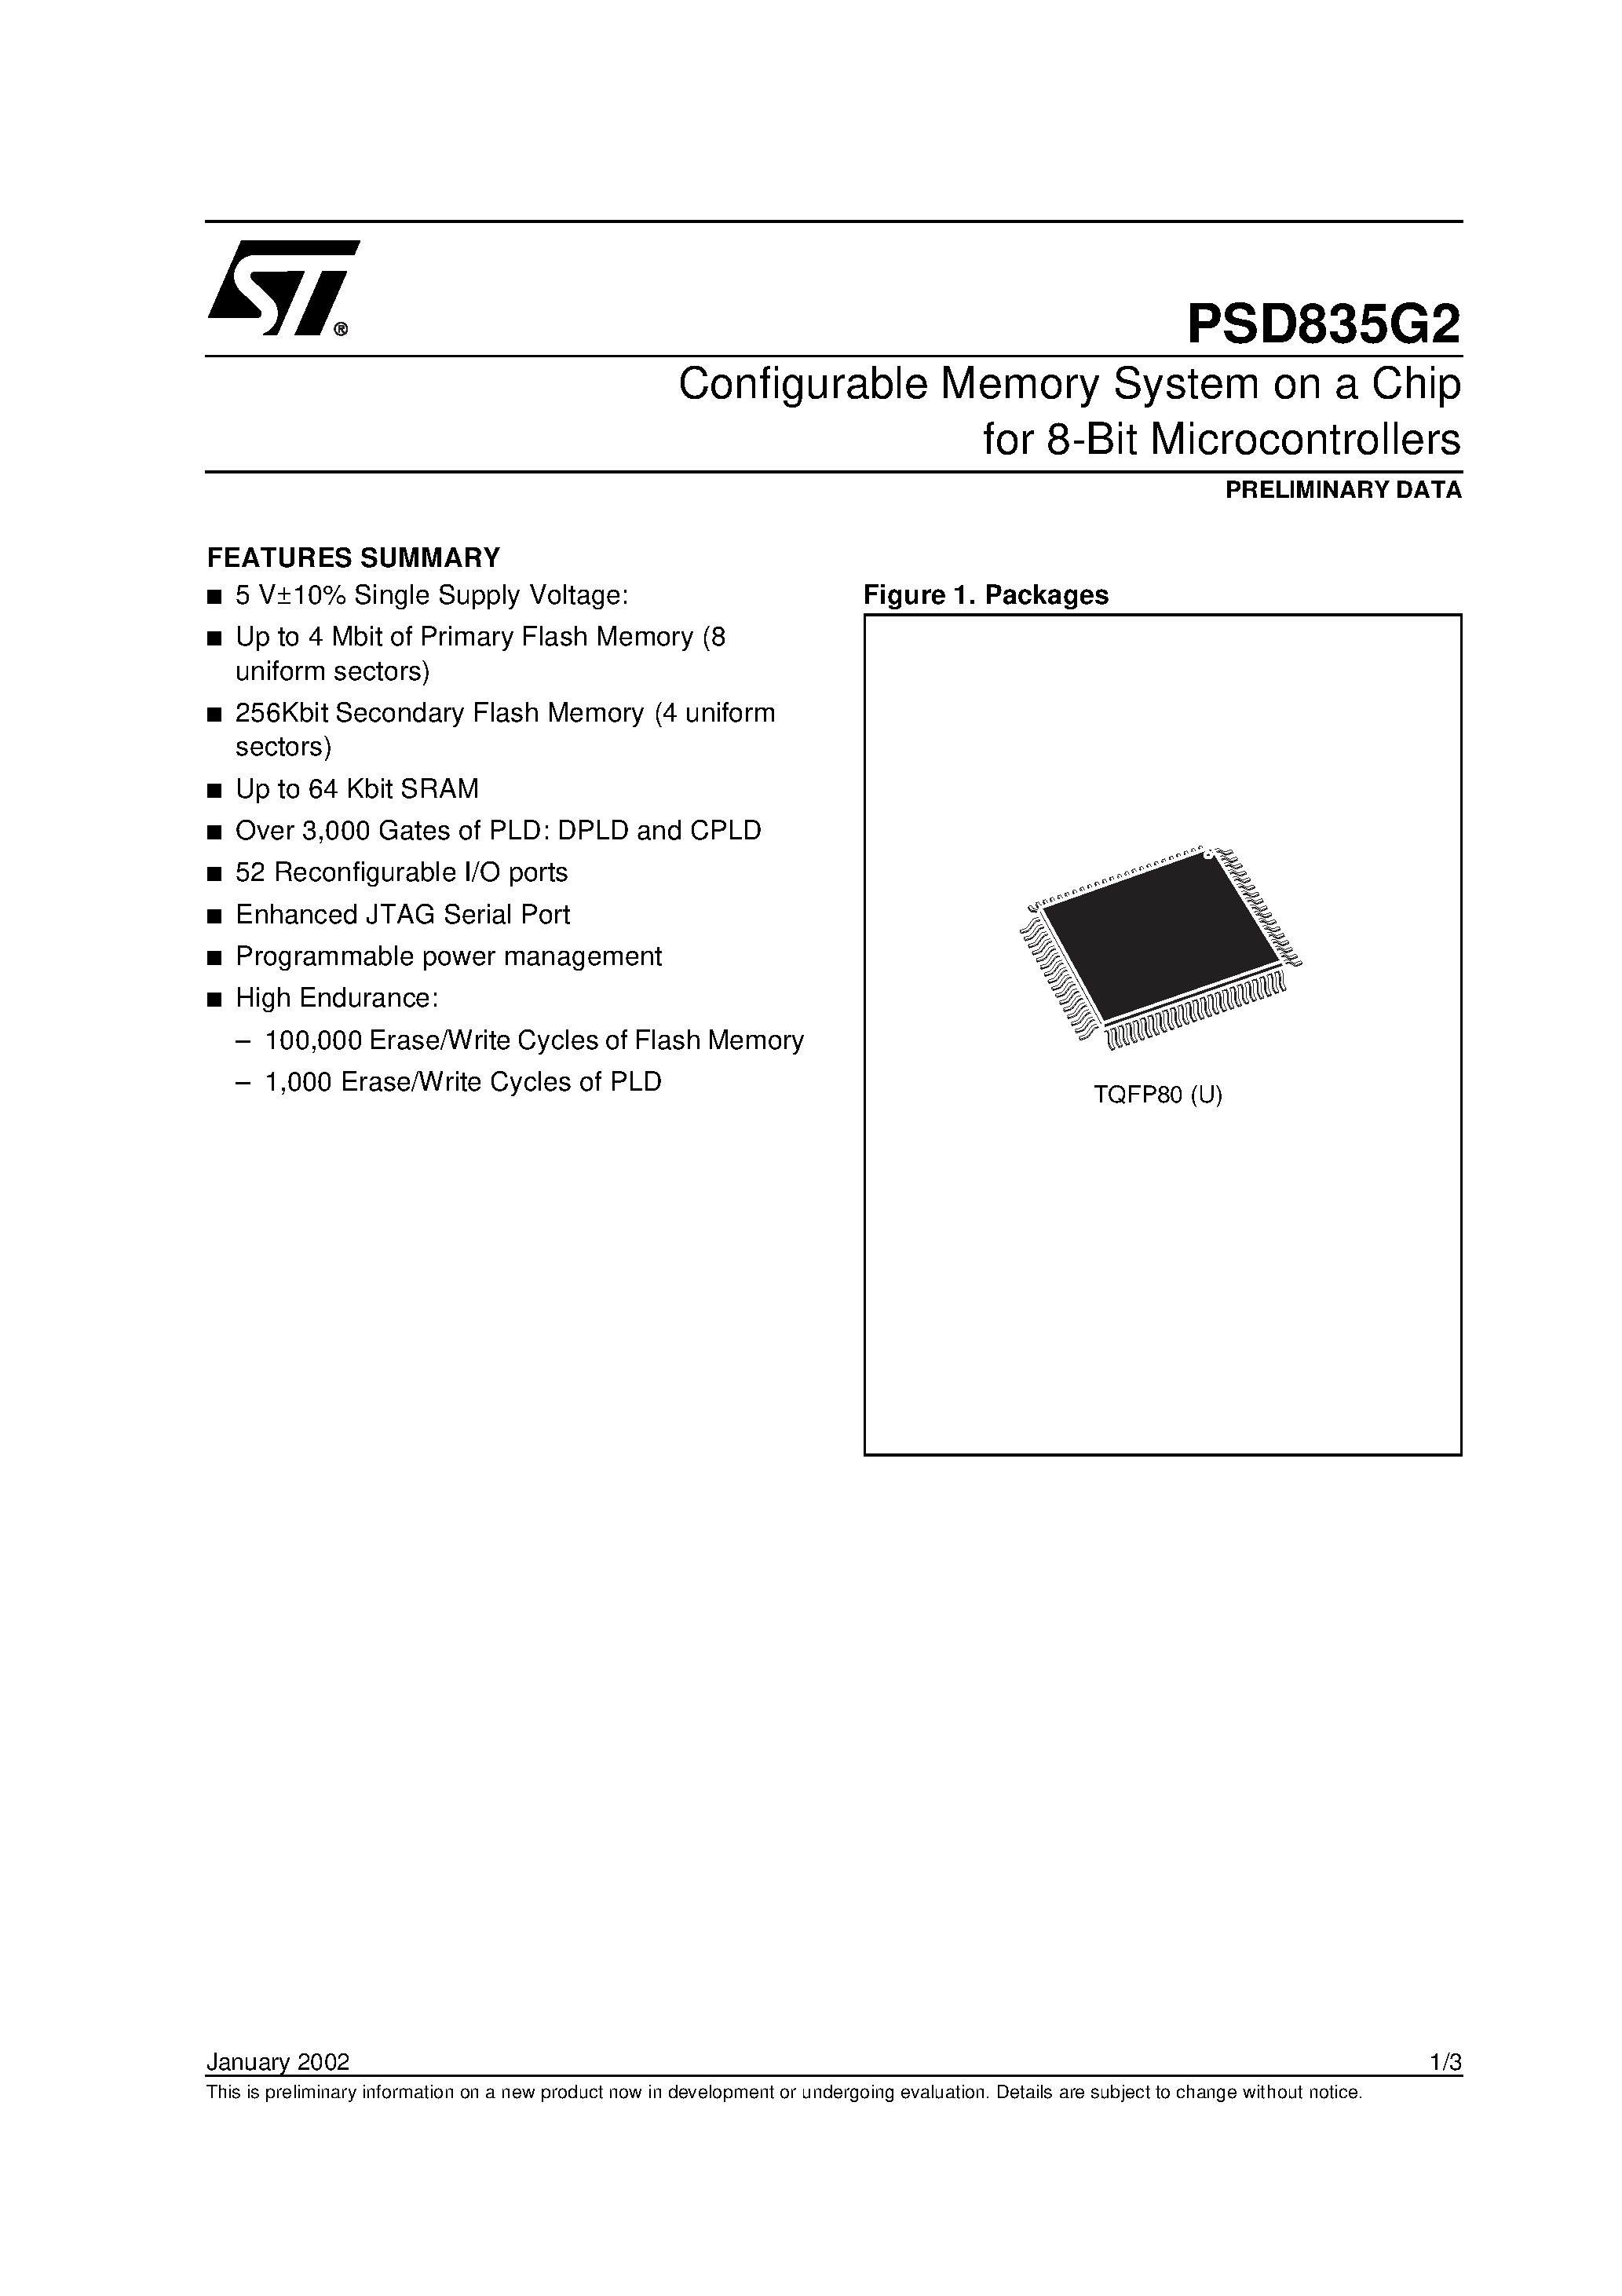 Datasheet PSD835F2V-A-12M - Configurable Memory System on a Chip for 8-Bit Microcontrollers page 1